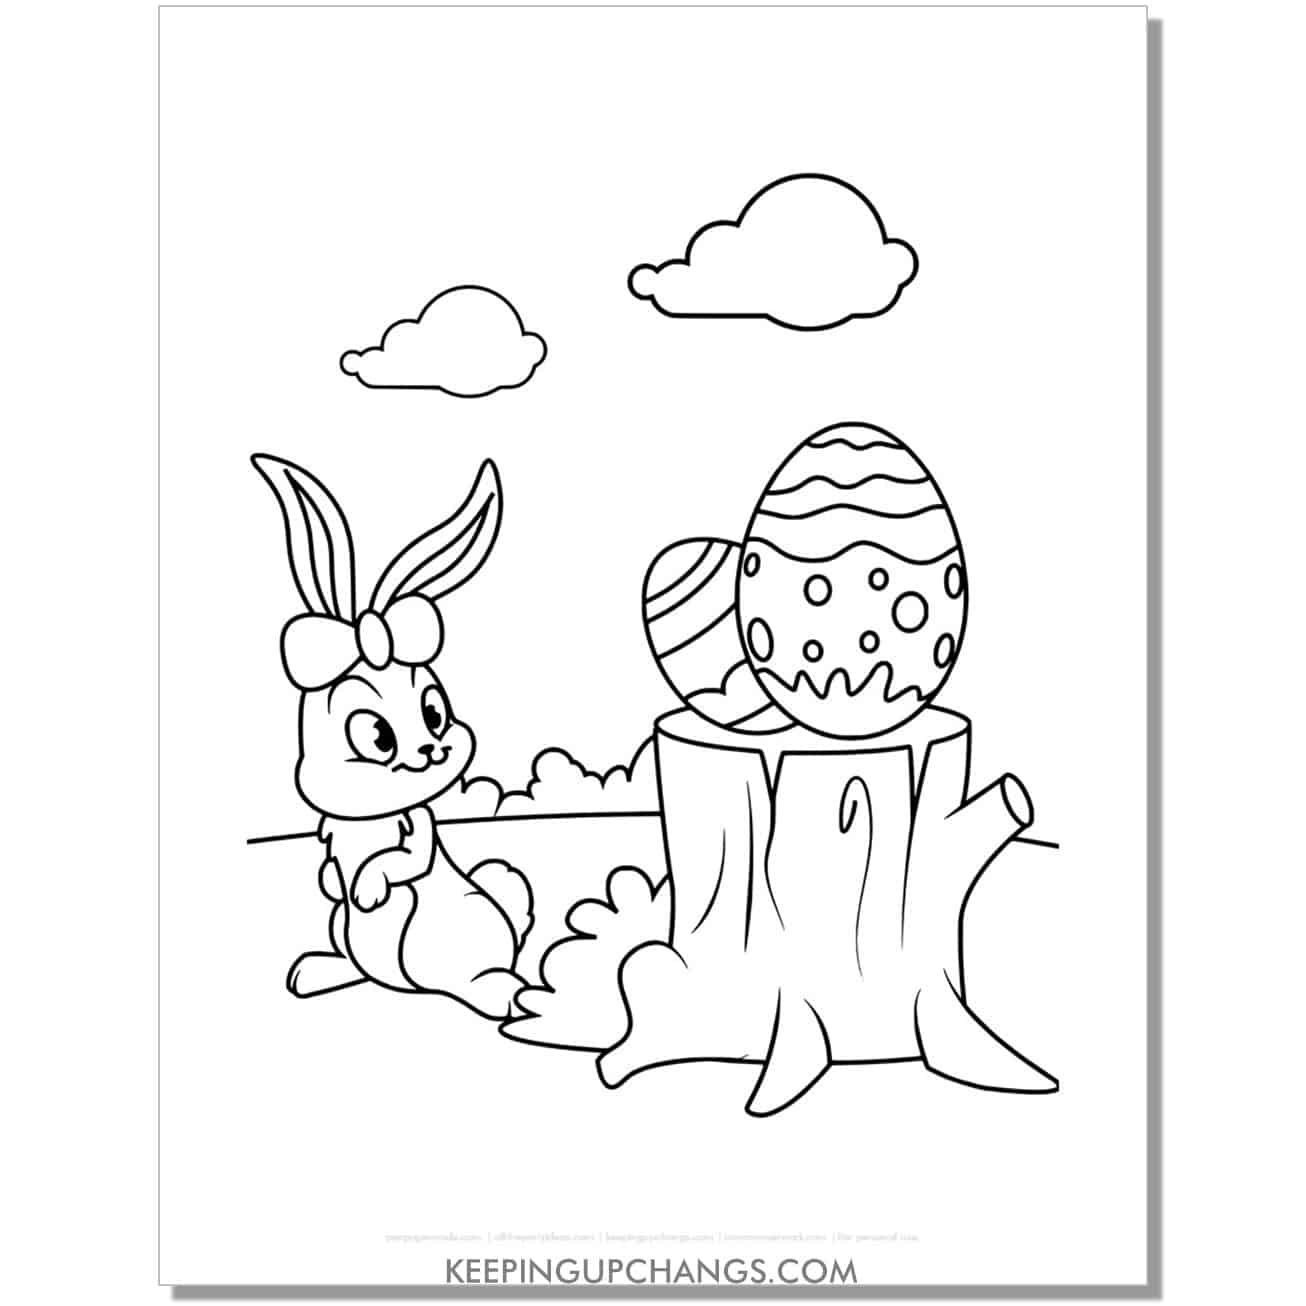 cute easter bunny sees eggs on tree stump coloring page, sheet.